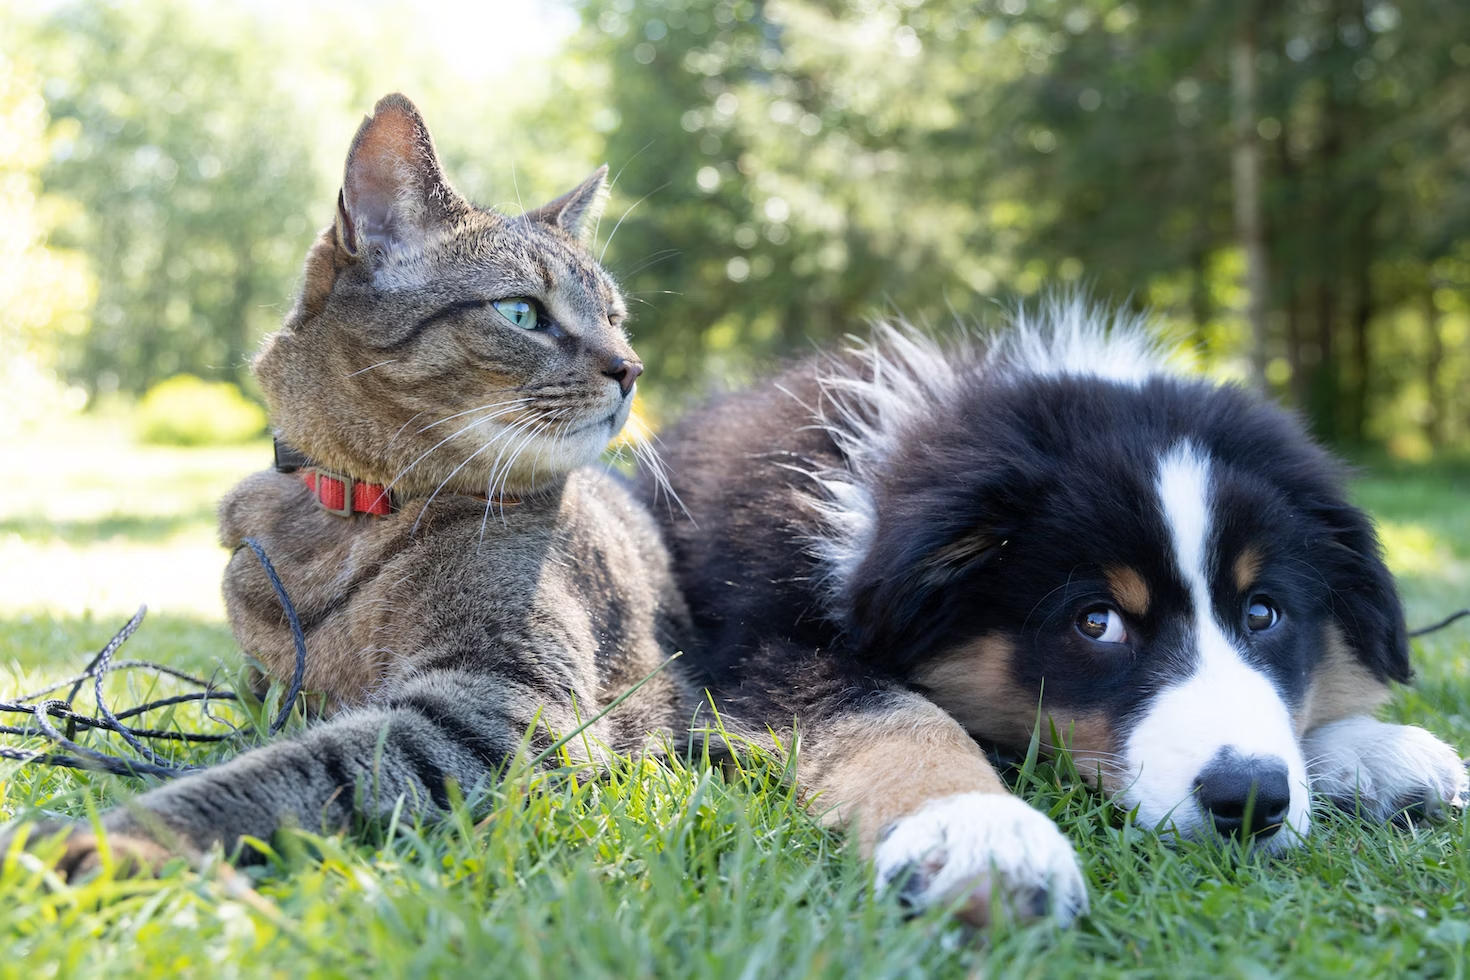 both an older dog and cat